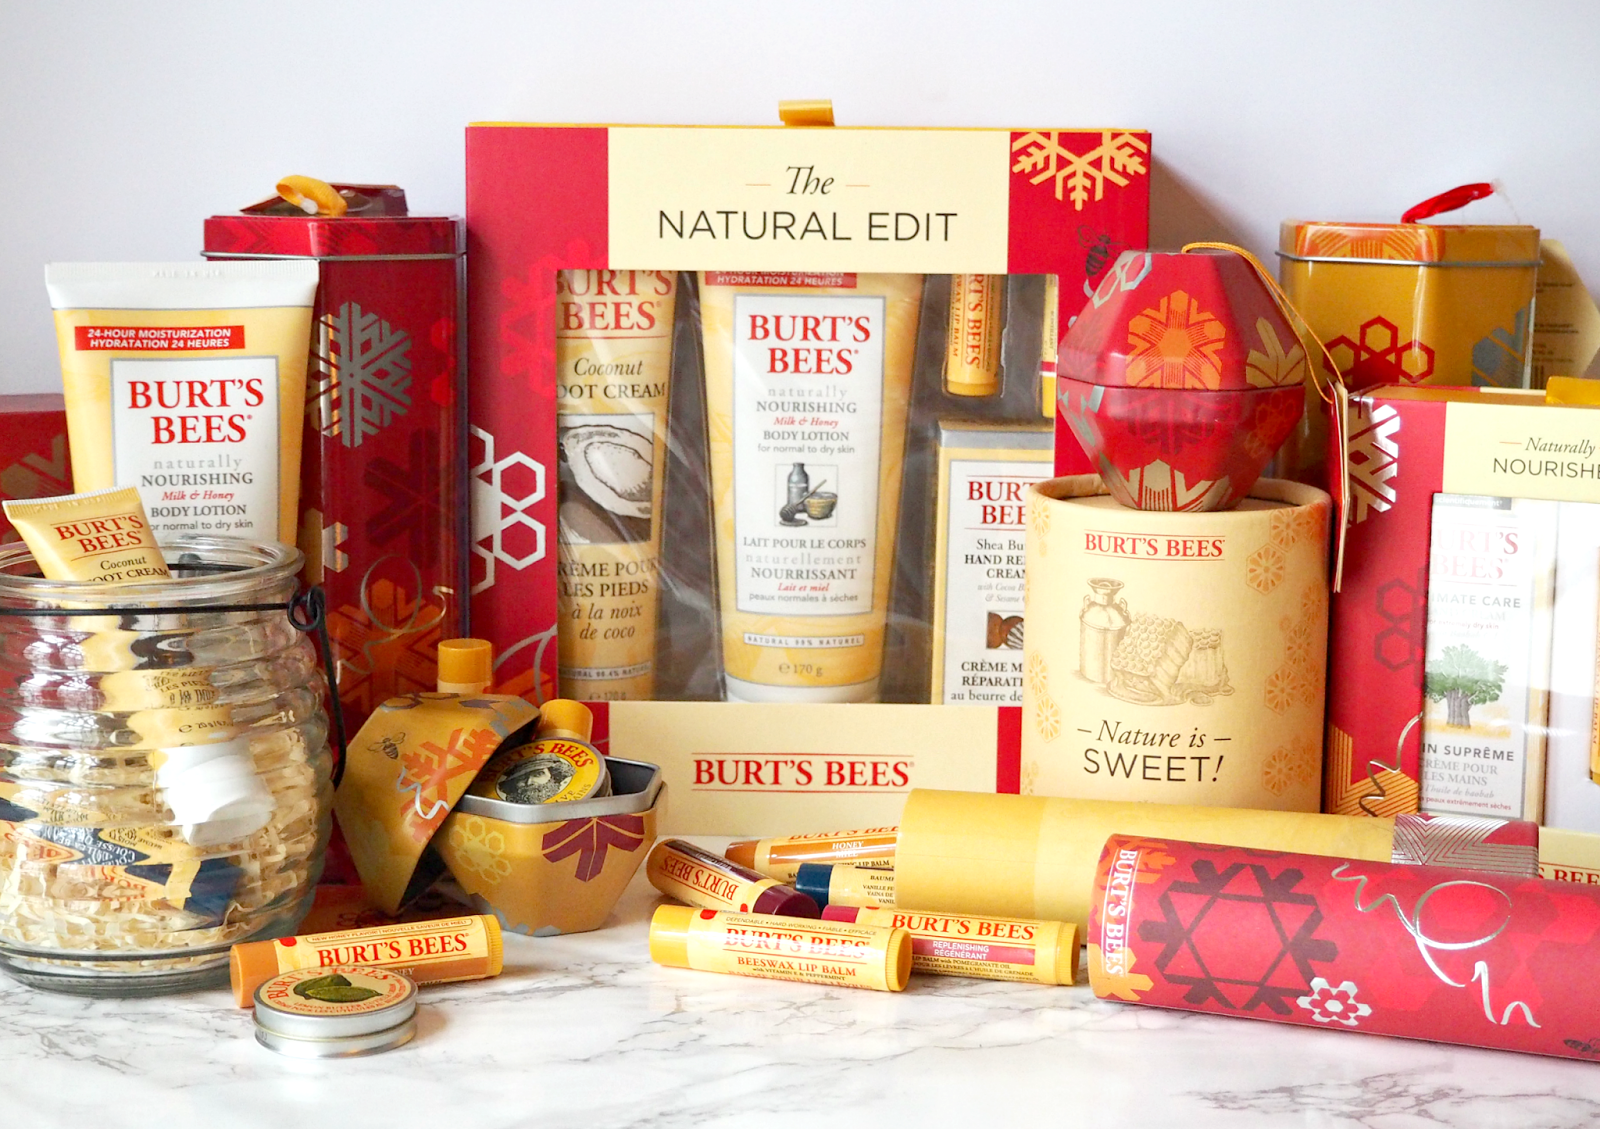 BURT'S BEES 12 DAYS OF CHRISTMAS: LAST MINUTE GIFTS FOR EVERY BEAUTY LOVER